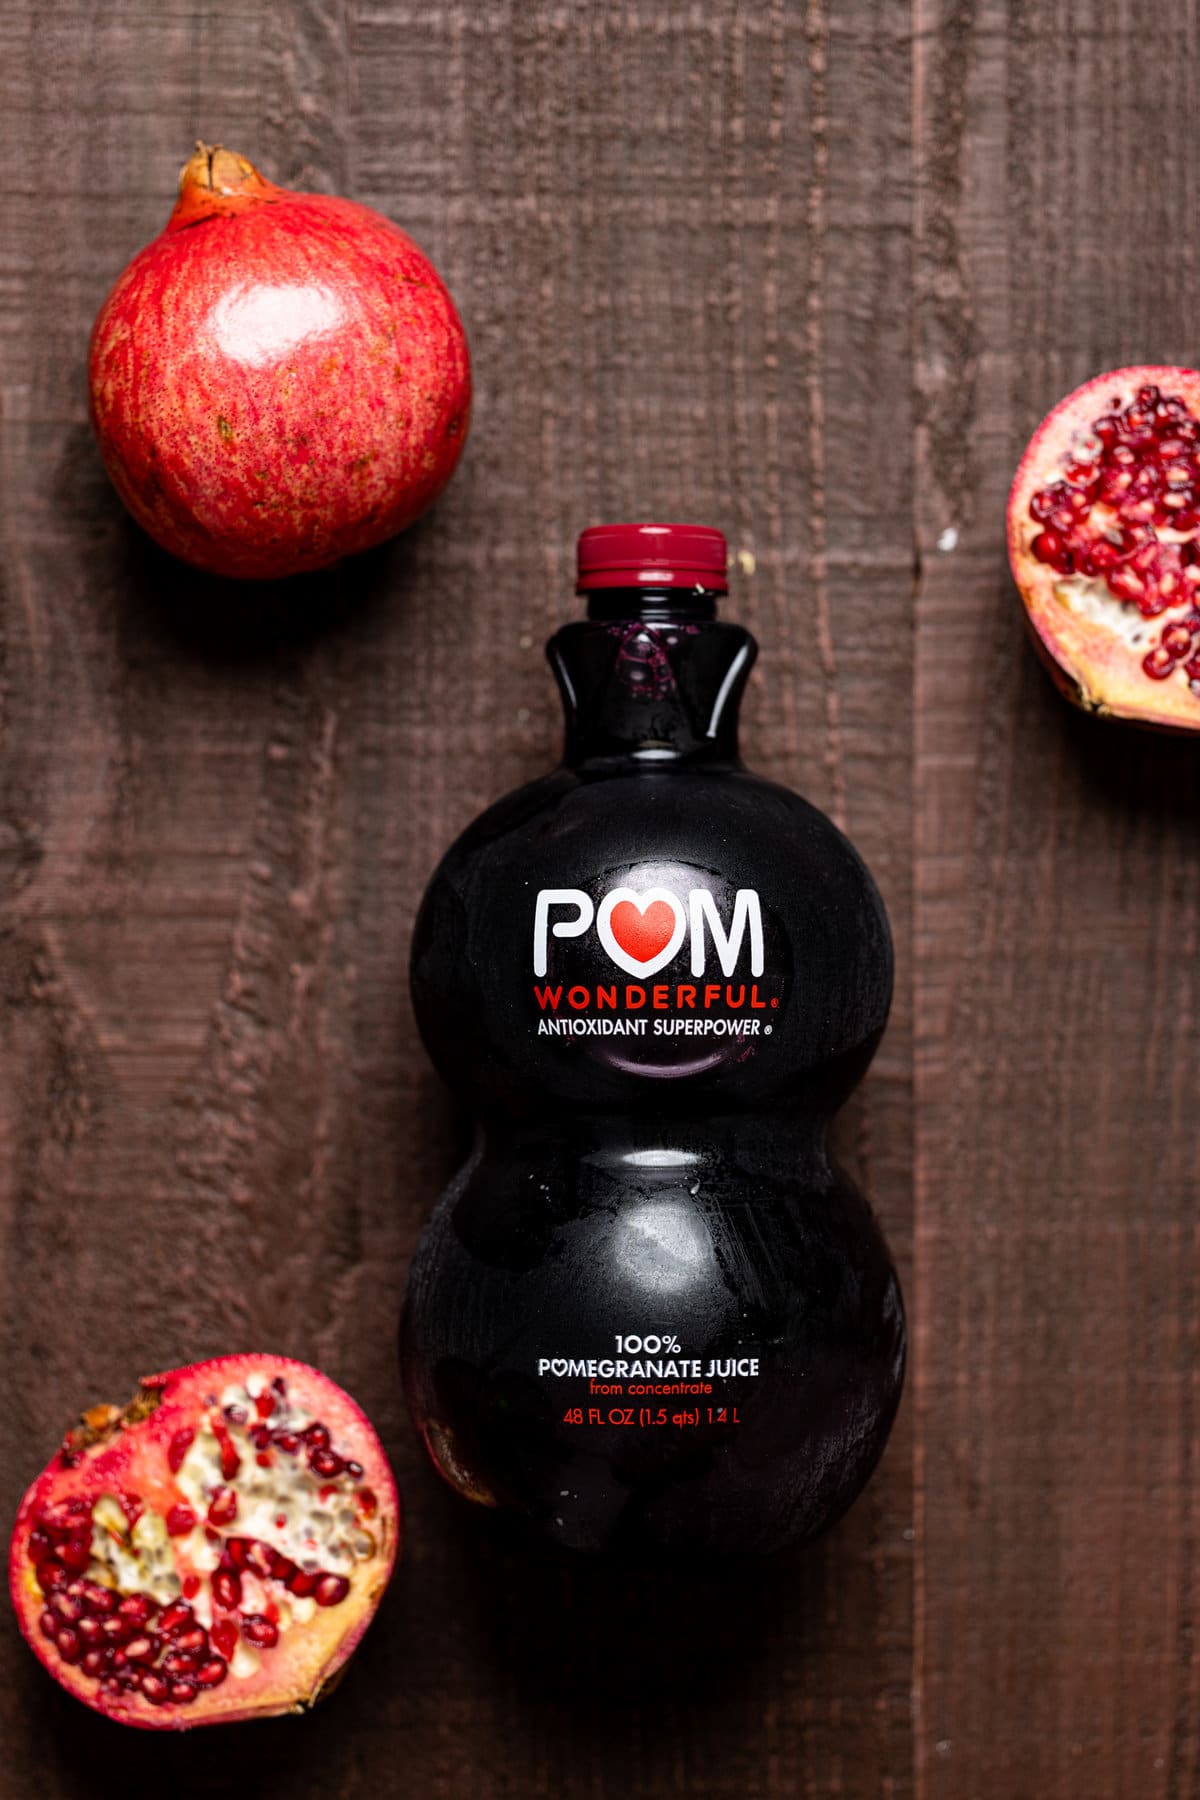 Bottle of POM pomegranate juice next to two pomegranate halves and one full pomegranate